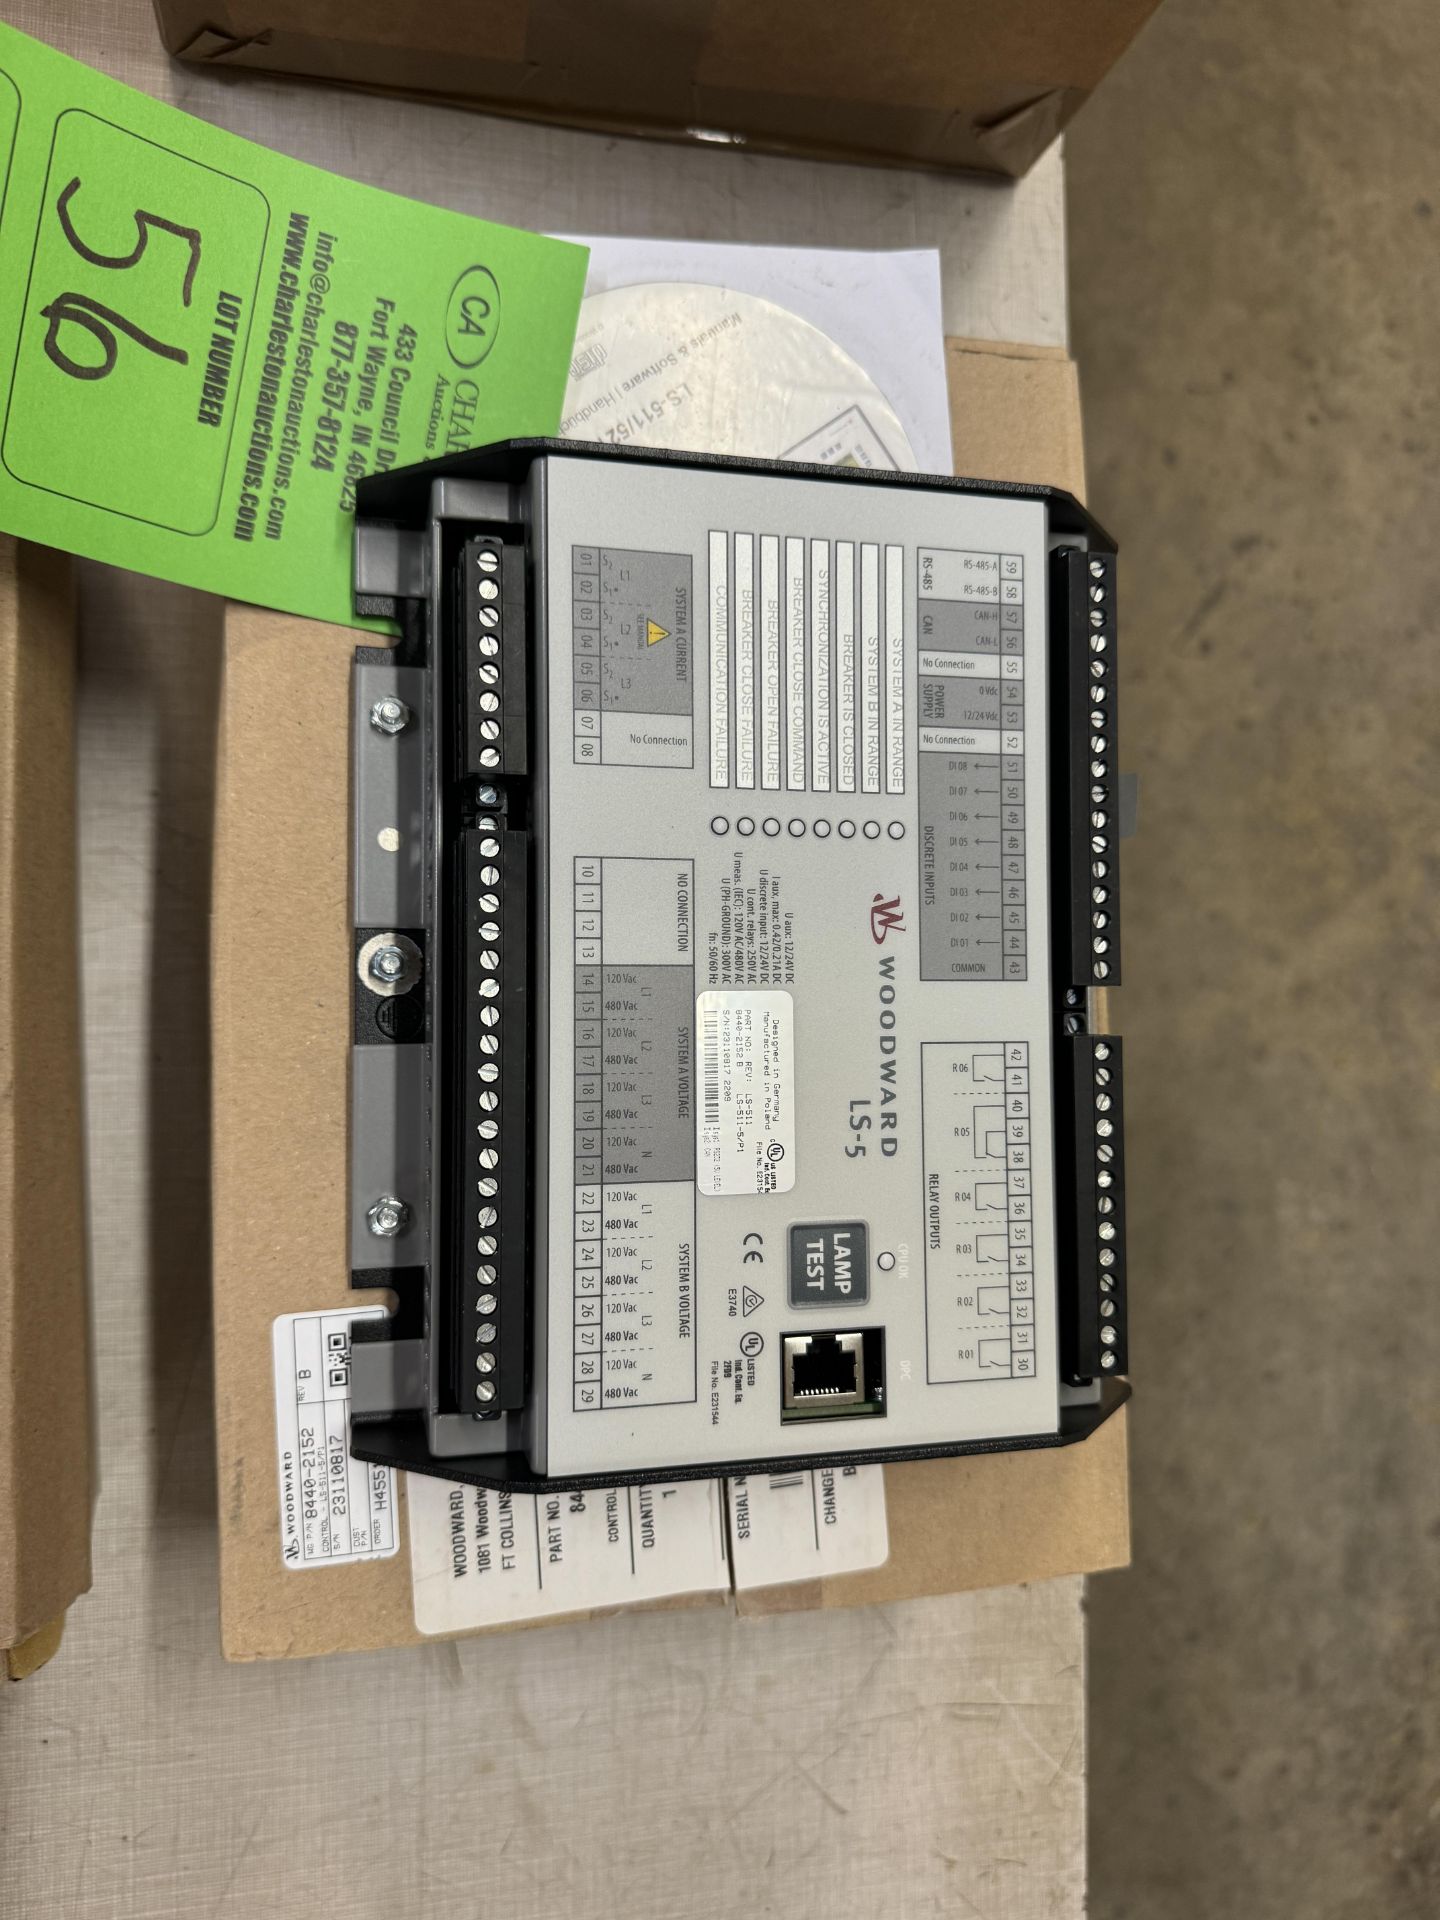 WOODWARD LS-5 CIRCUIT BREAKER CONTROL AND PROTECTION P/N: 8440-2152B